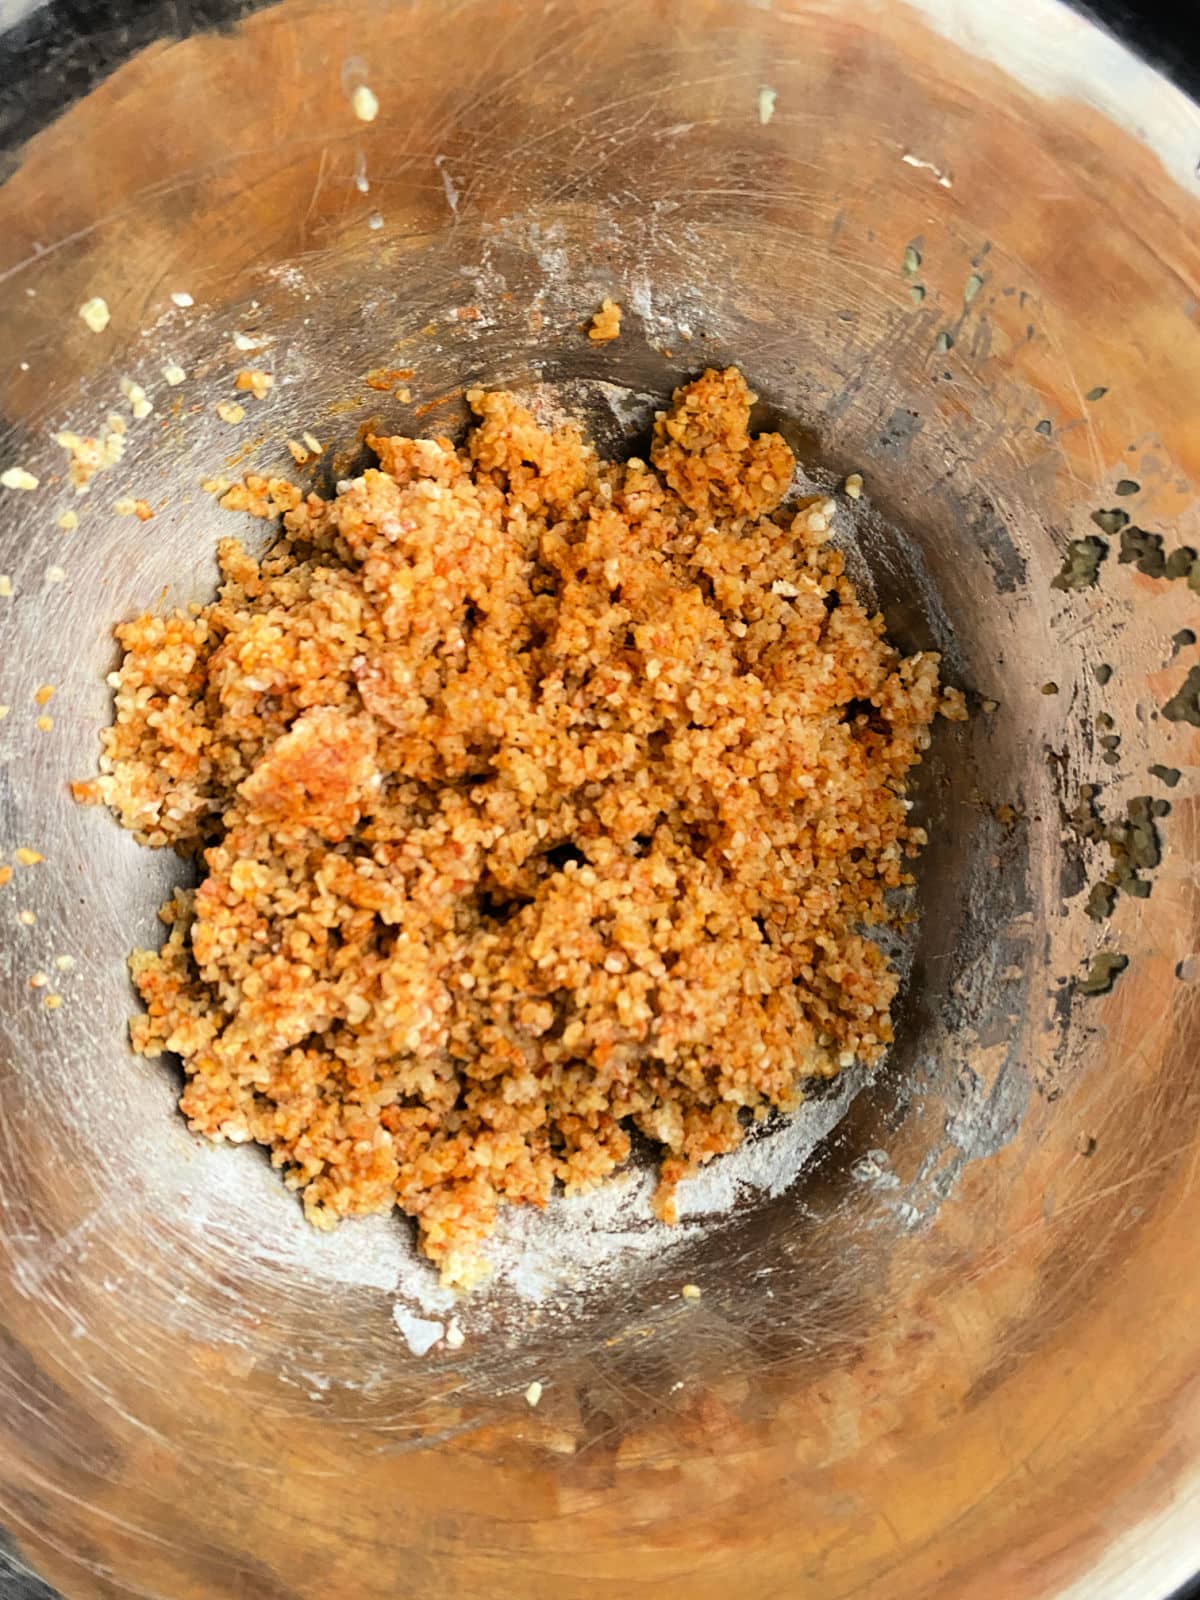 Bulgur, chicpeas and spices mixed into a bowl
